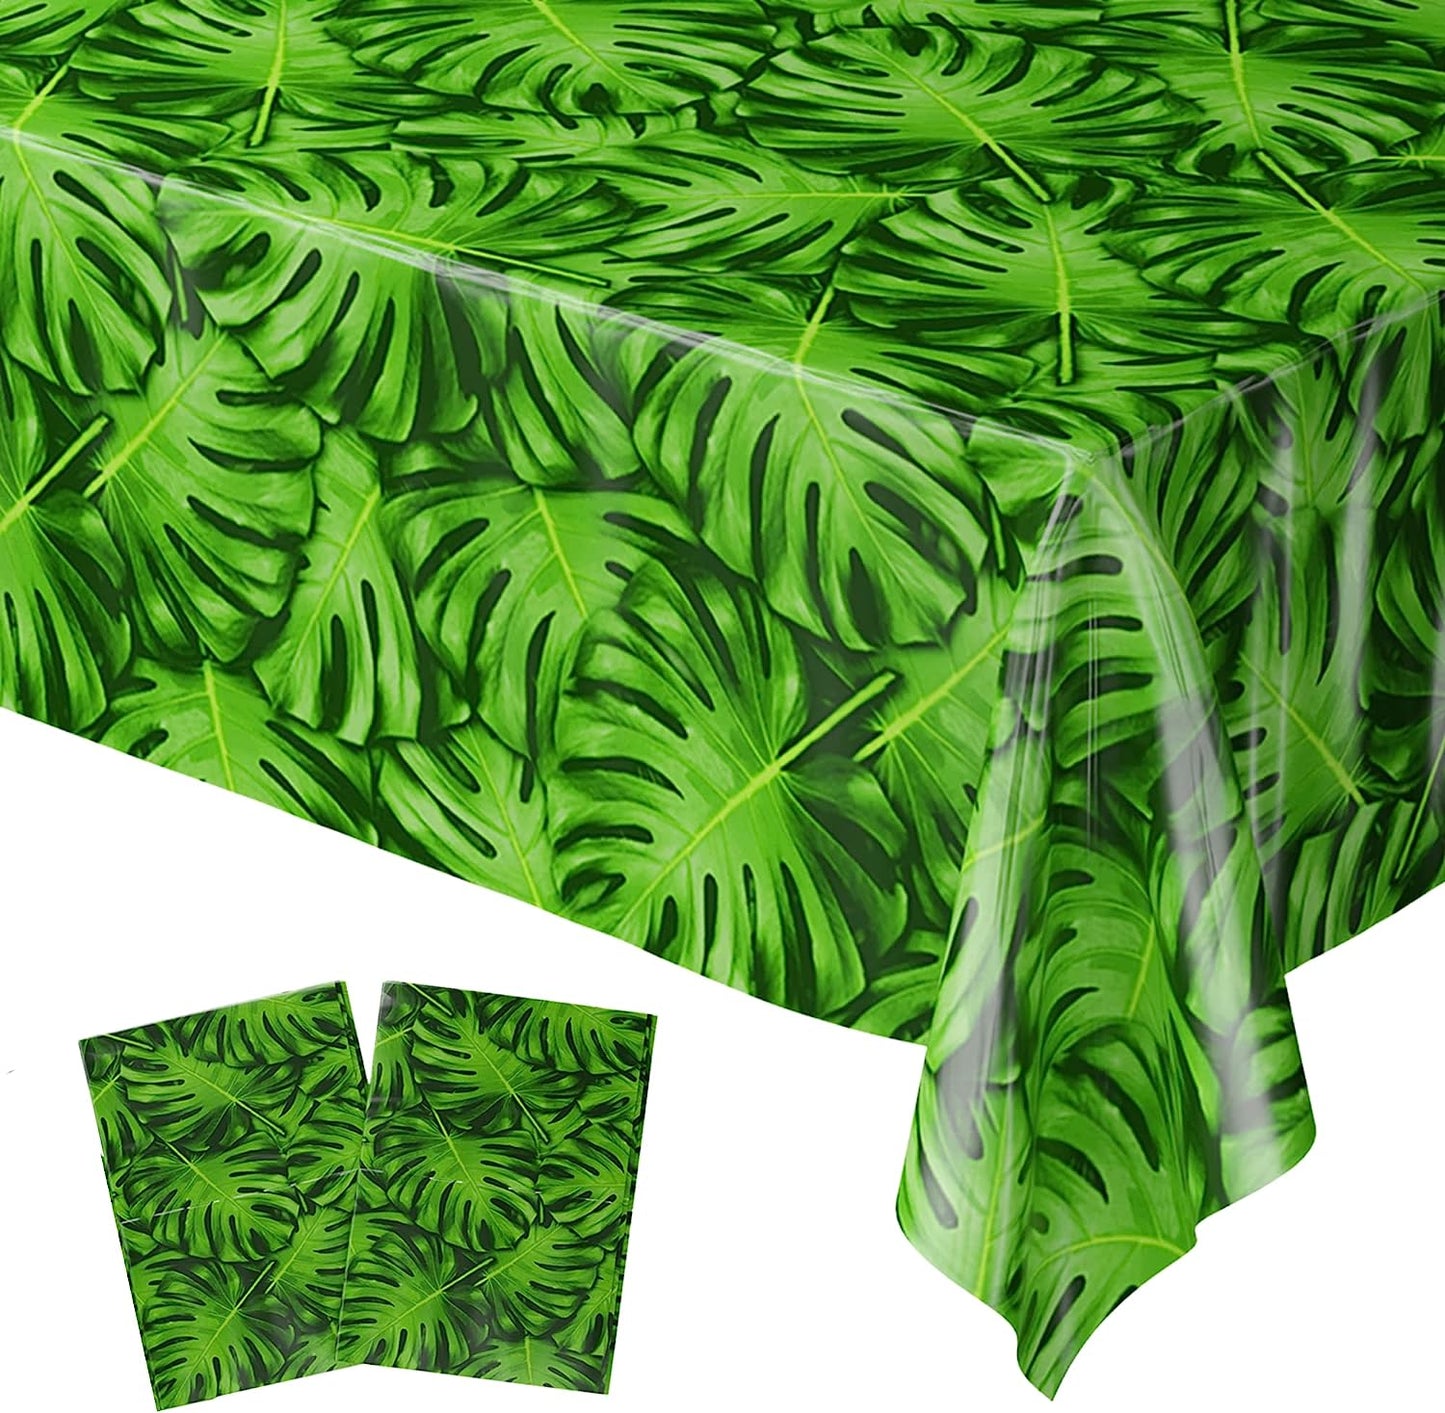 Two palm leaf patterned table covers, each measuring approximately 108 inches by 54 inches, displayed on a wooden table with a white background.